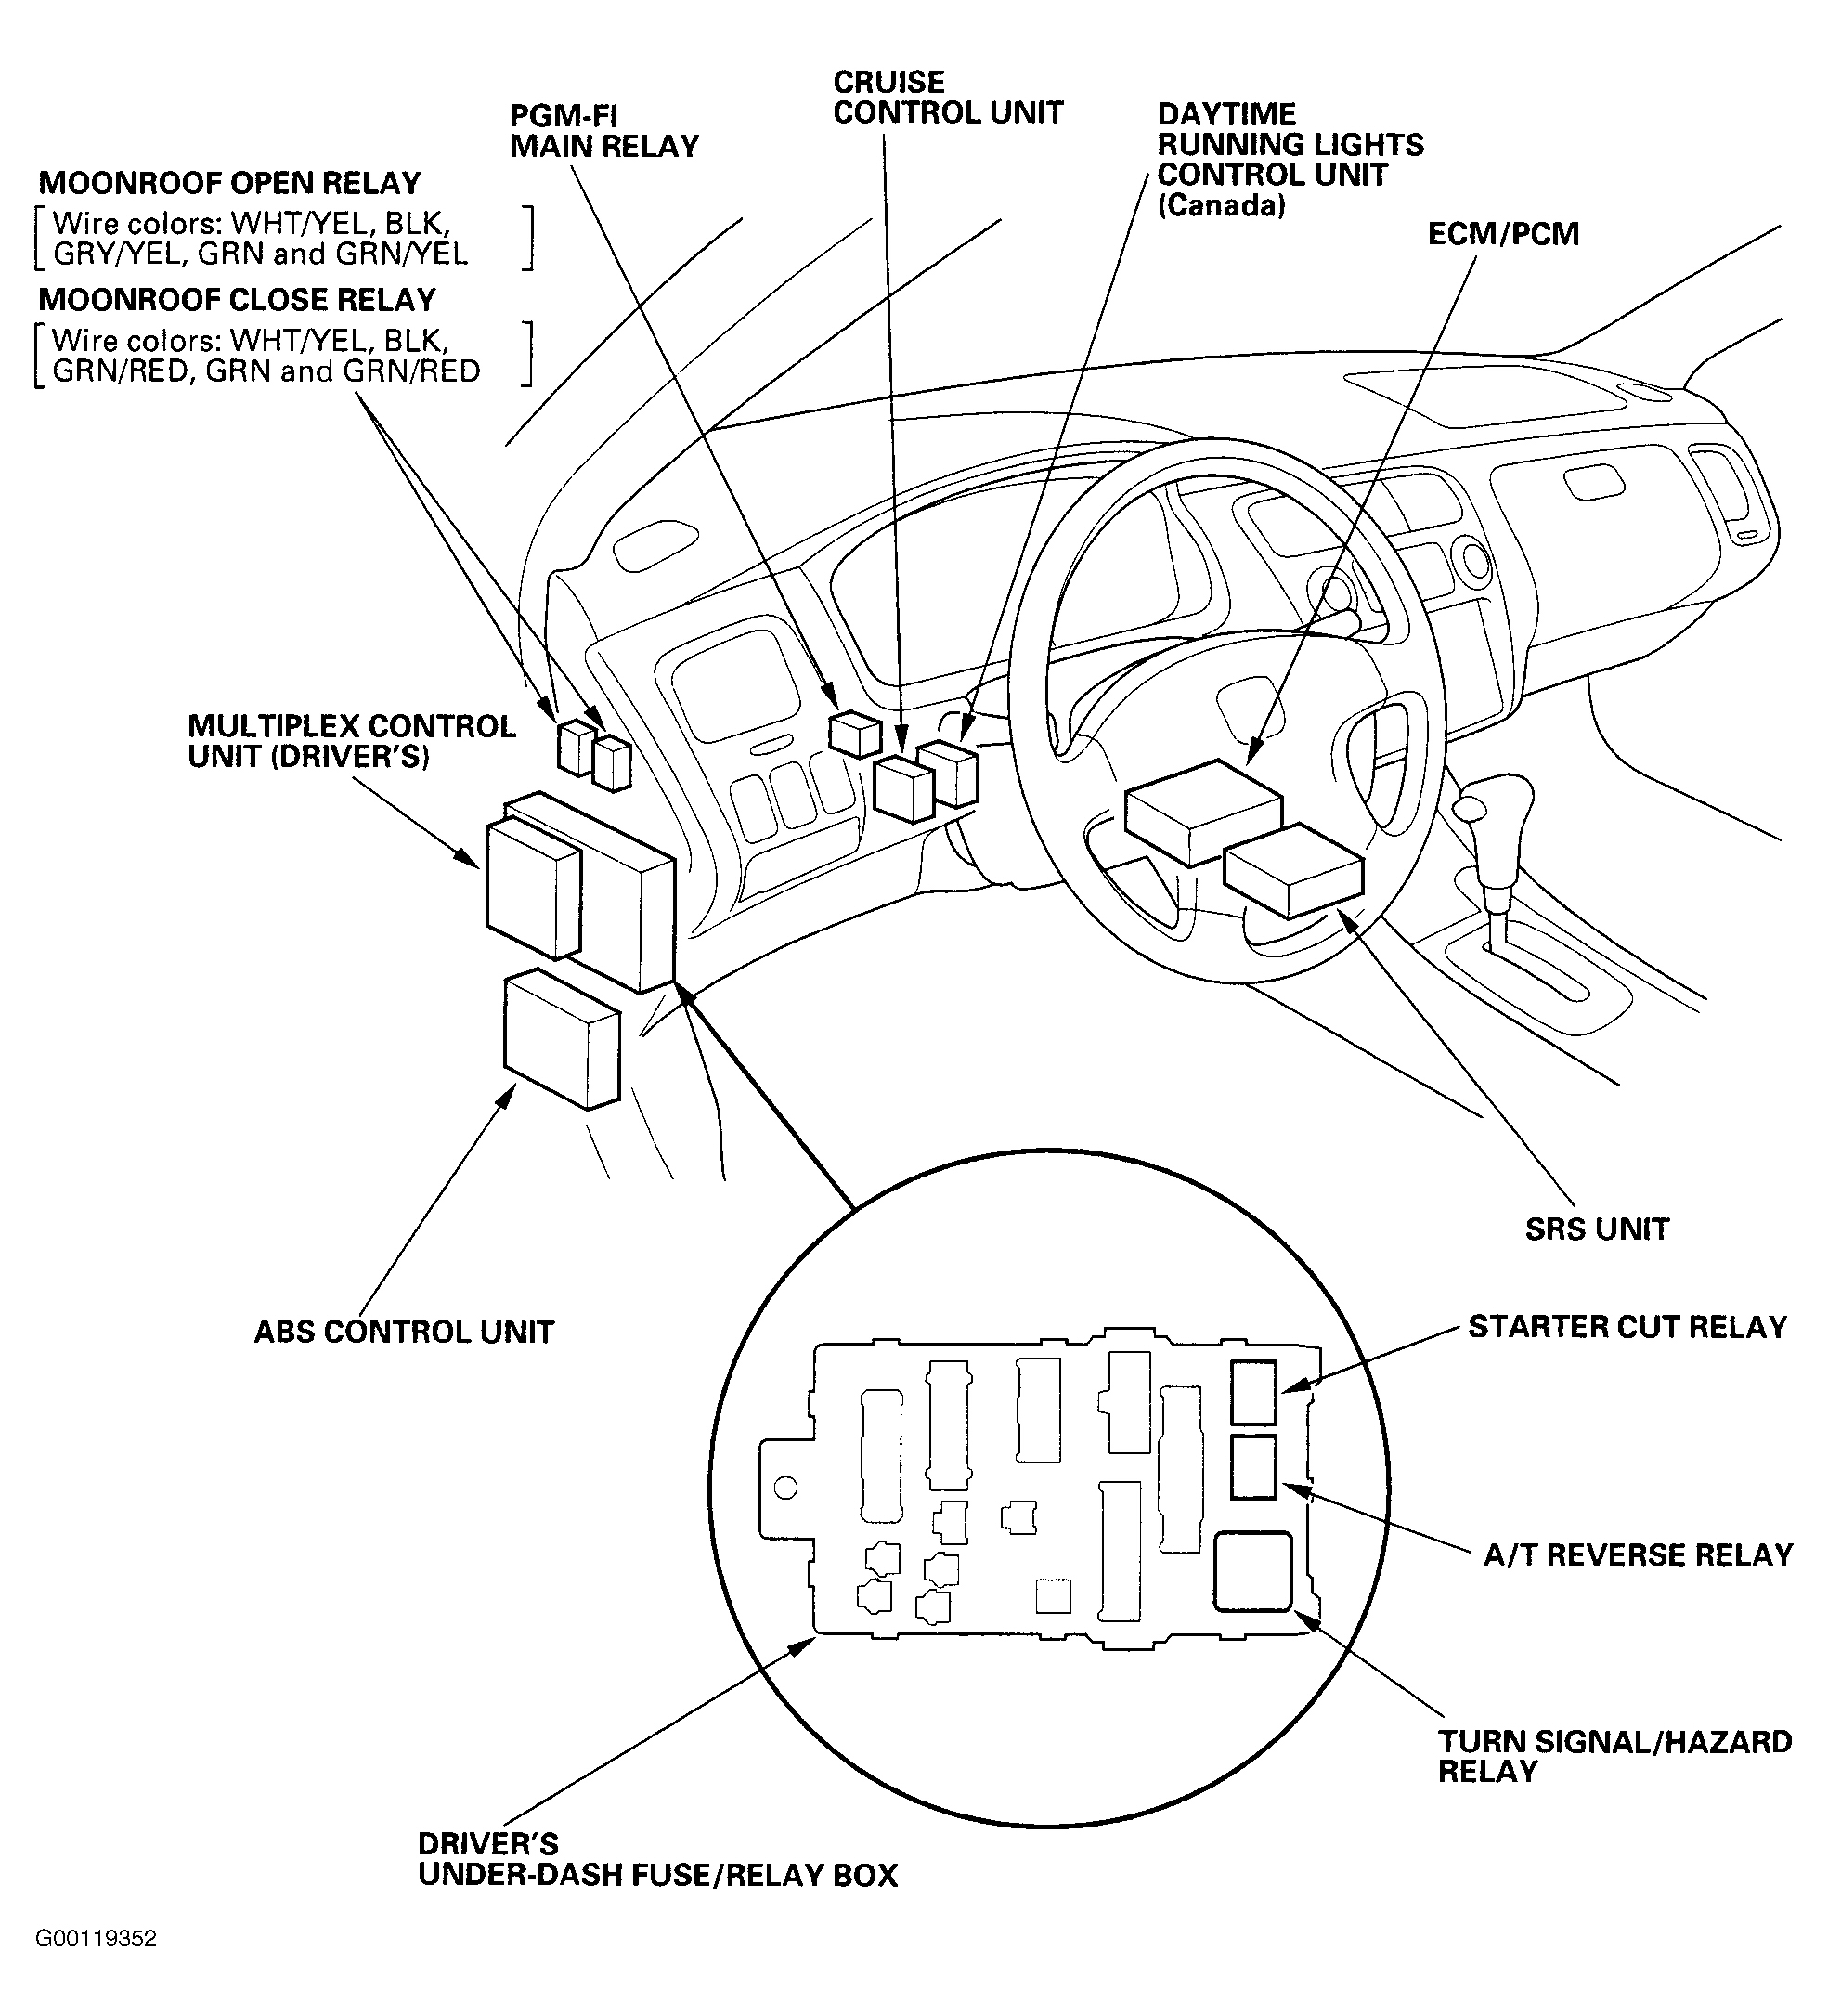 Honda Accord DX 2000 - Component Locations -  Locating Drivers Under-Dash Fuse/Relay Box (4-Cylinder)